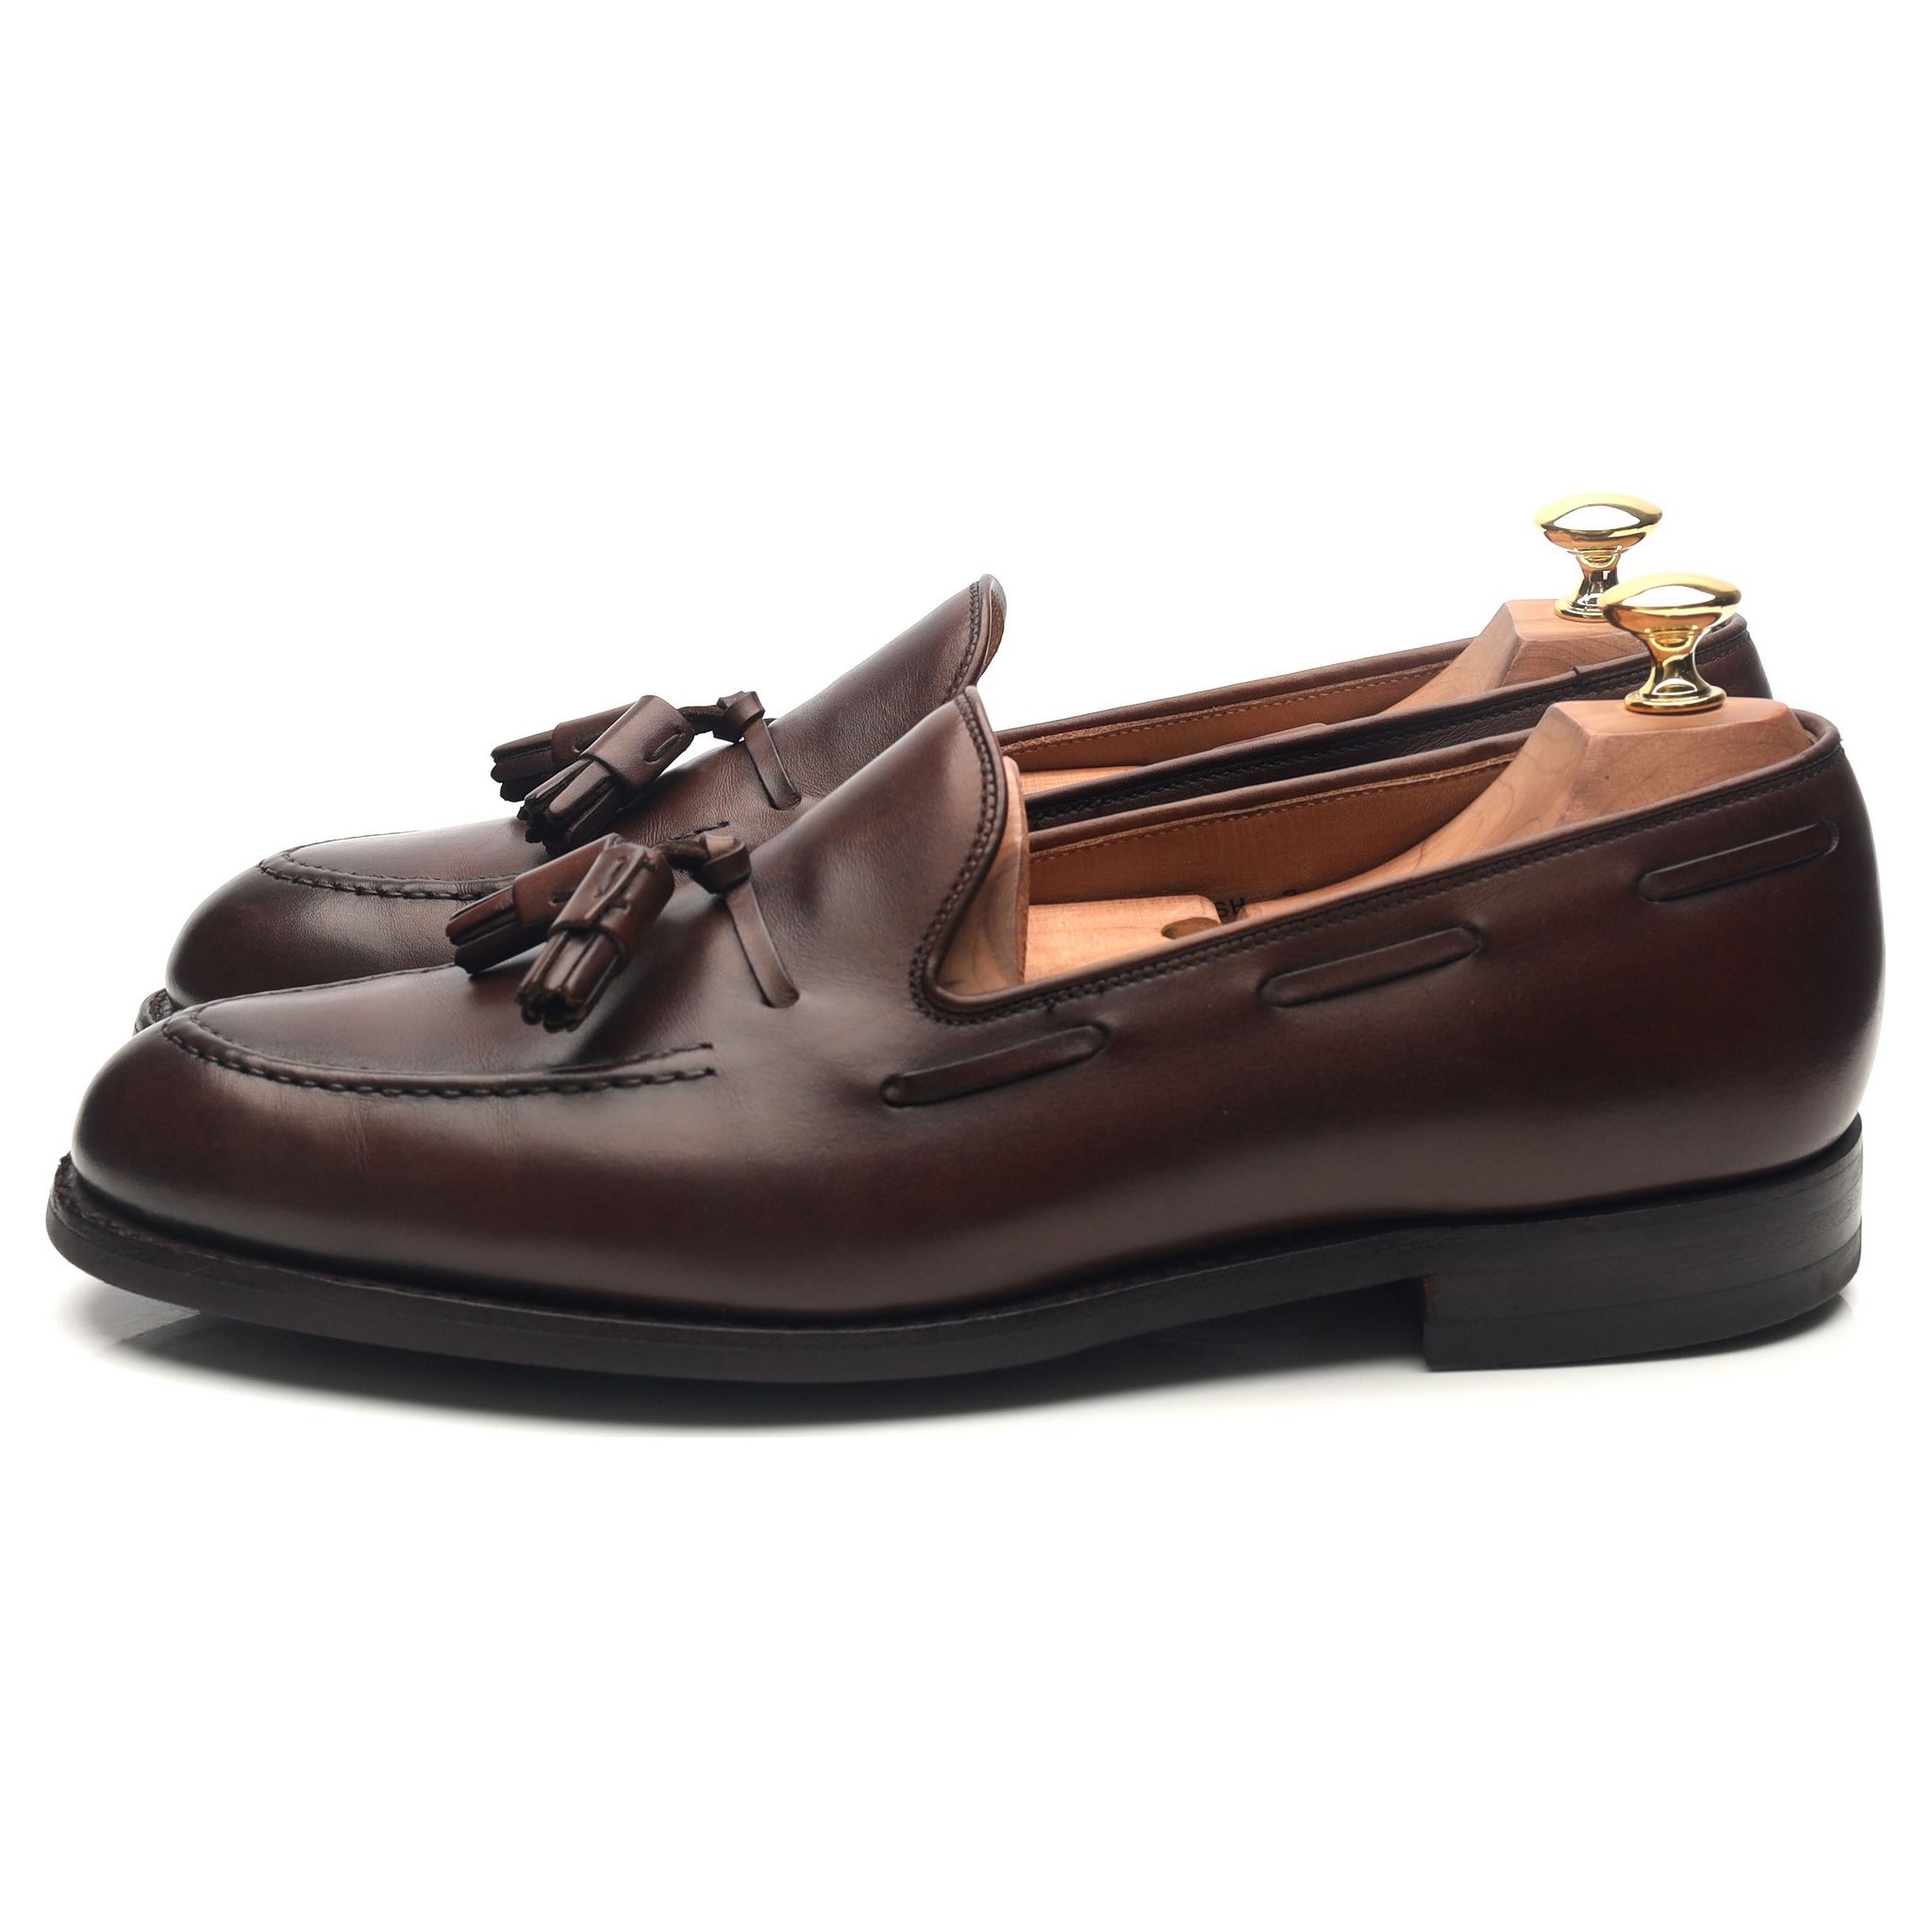 Cavendish 2' Dark Brown Leather Tassel Loafers UK 9 E - Abbot's Shoes